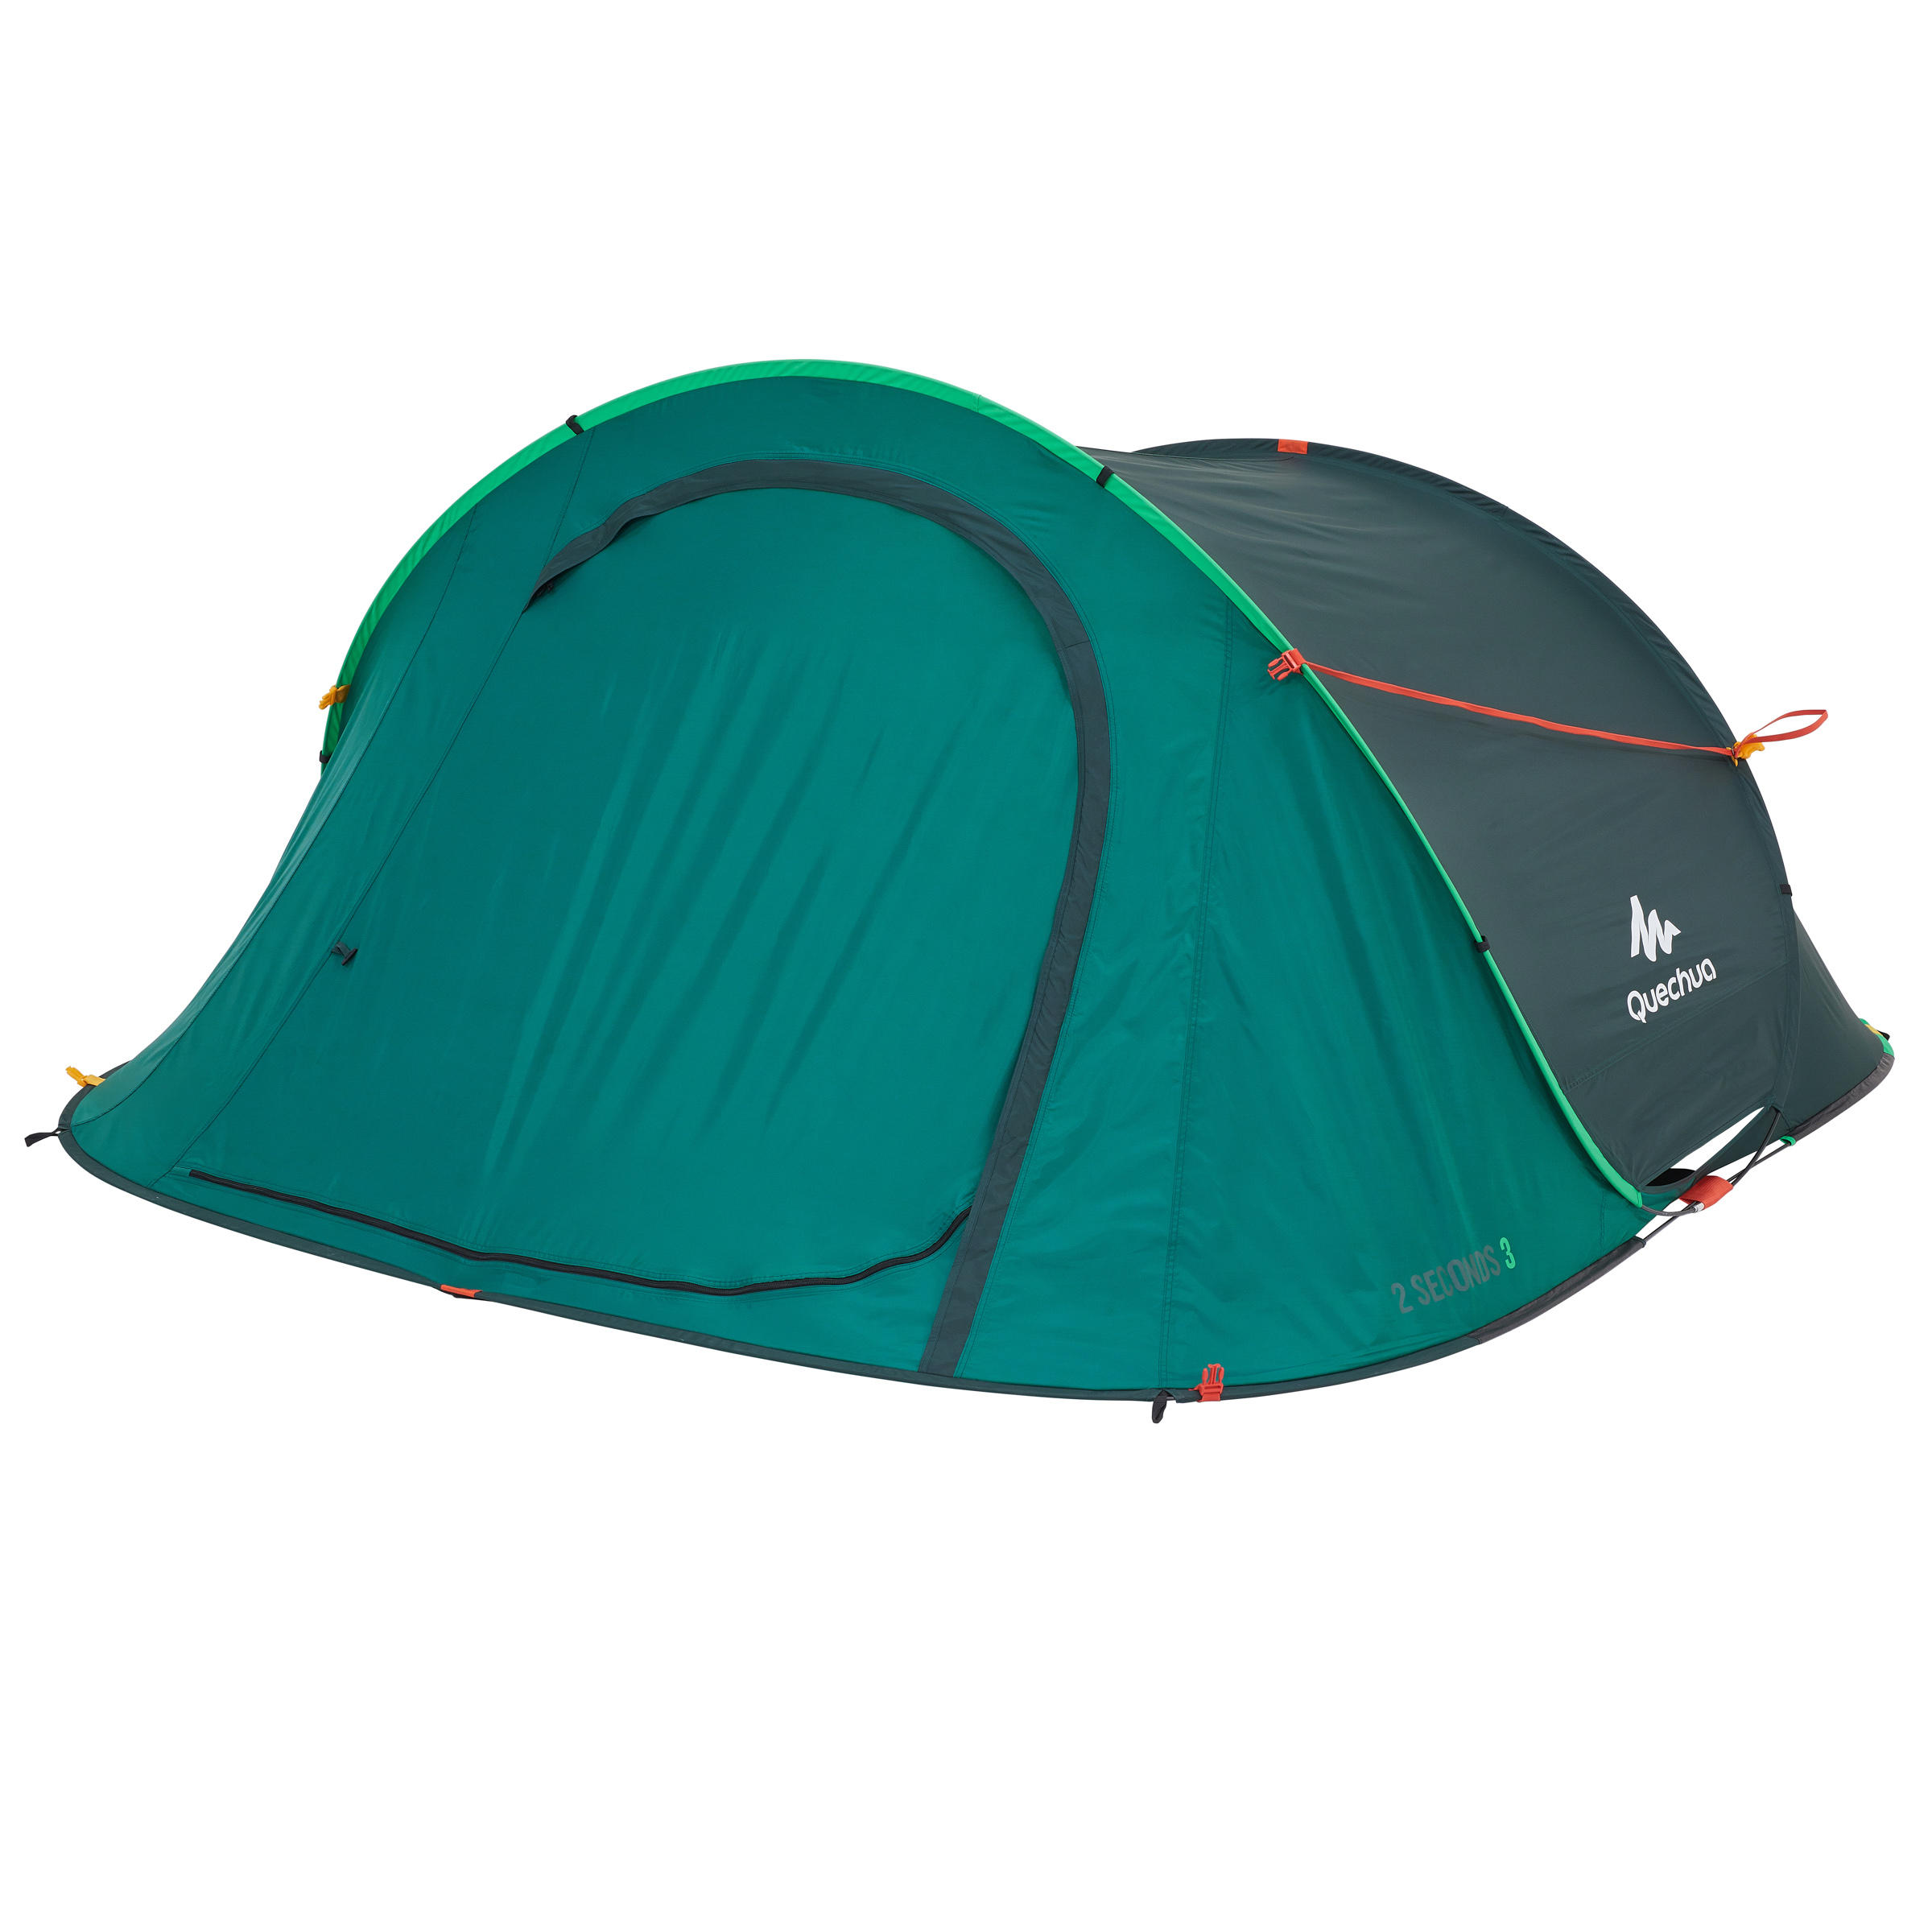 2 SECOND III Easy Flysheet and Tent Poles 4/4